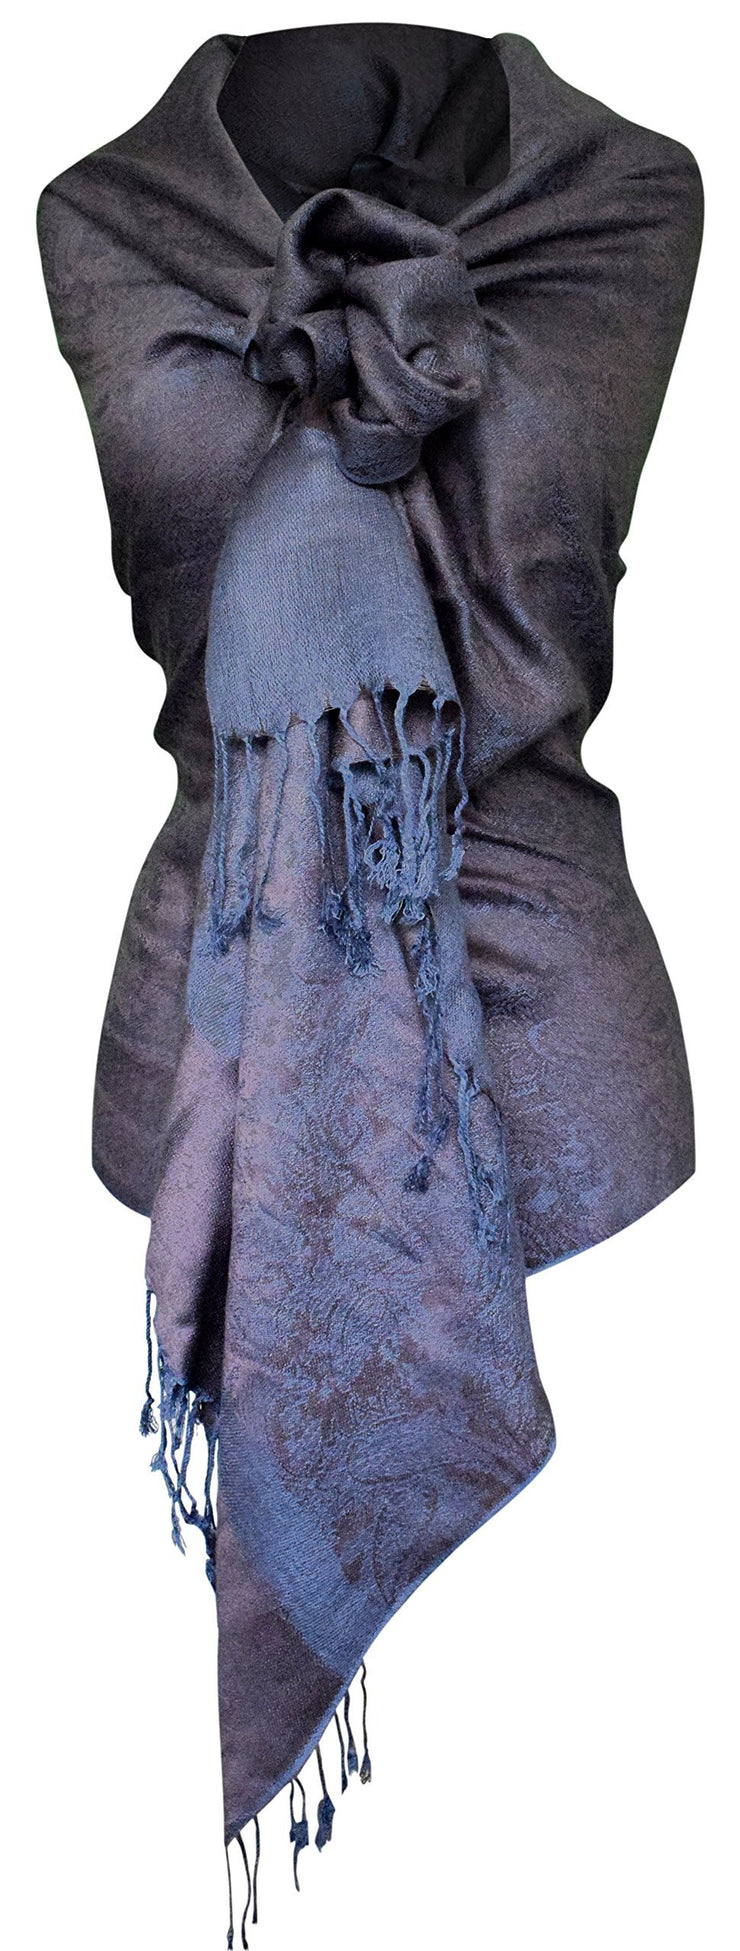 Chocolate Brown and Grey Peach Couture Elegant Vintage Two Color Jacquard Paisley Pashmina Shawl Wrap